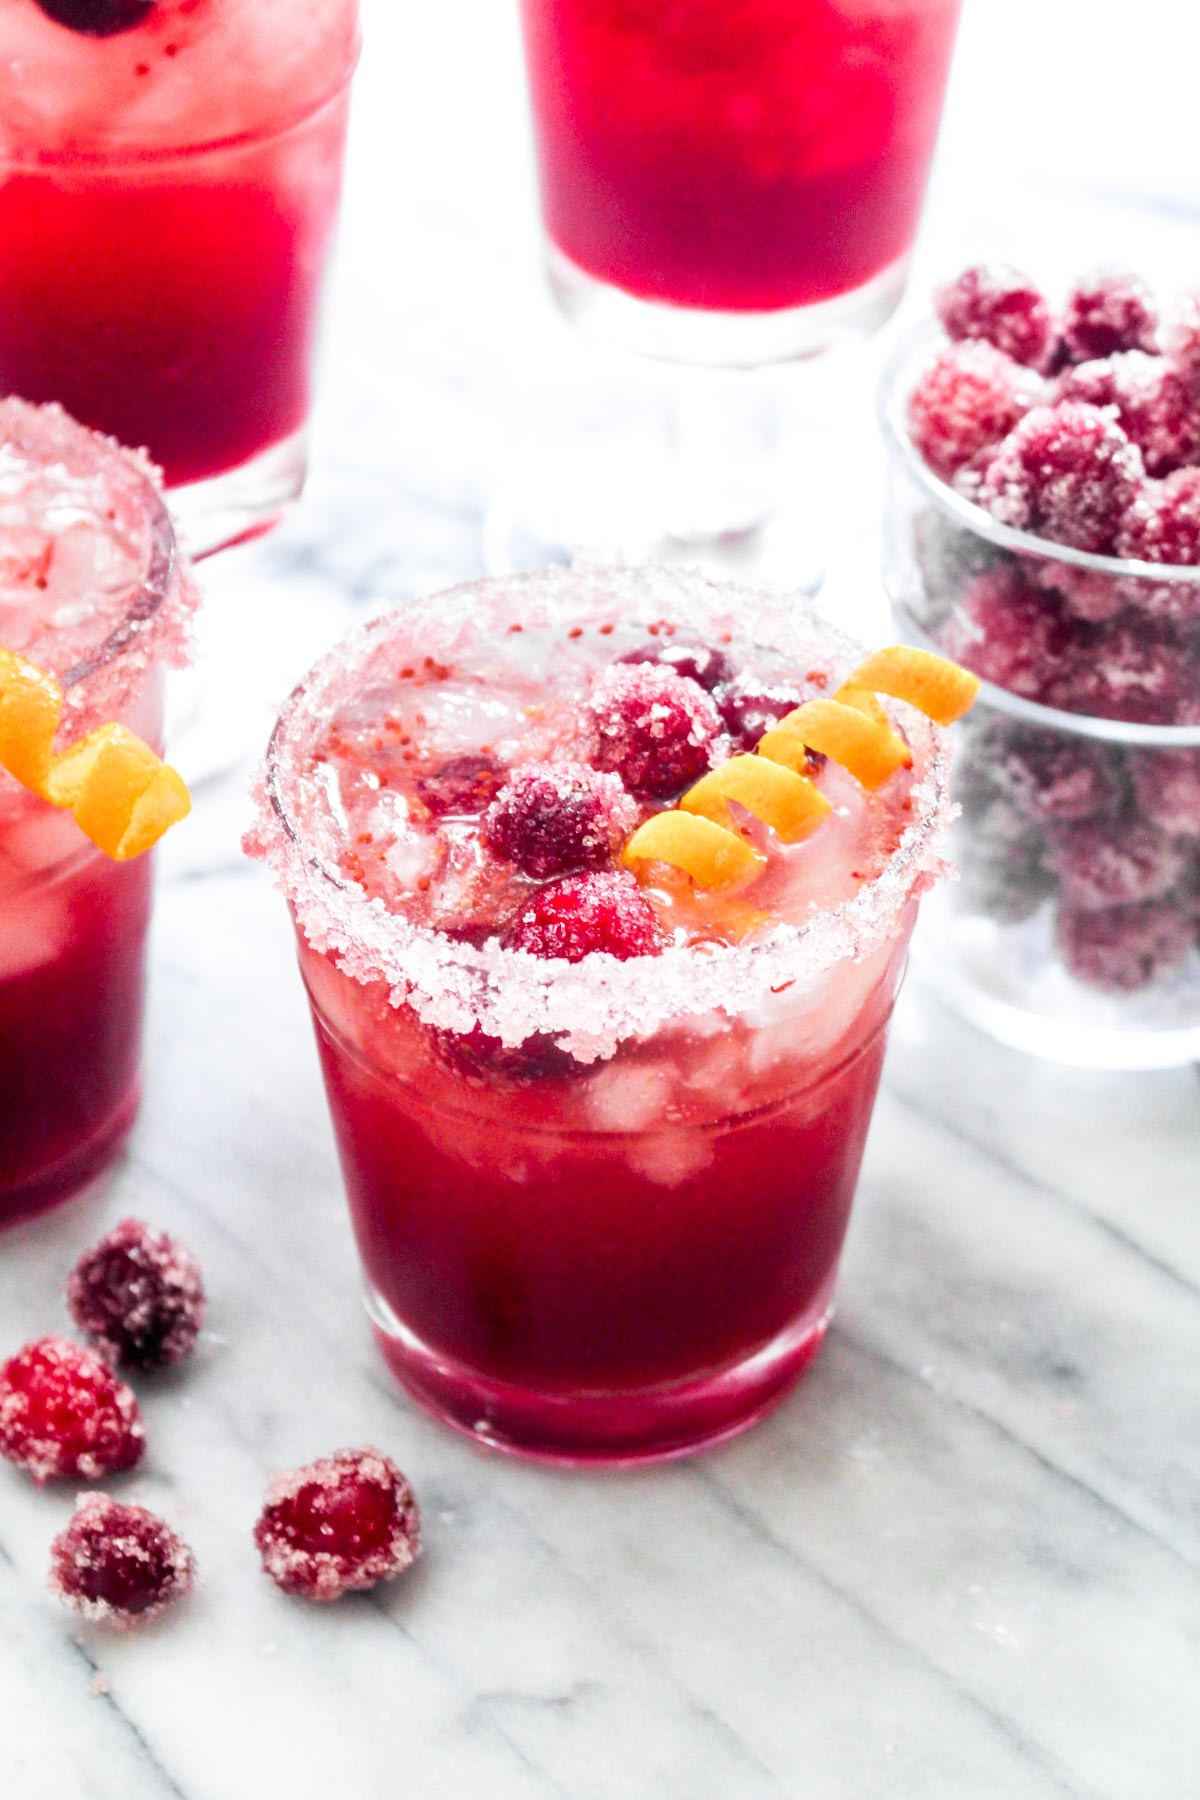 Cranberry Orange Gin Fizz - 12 Festive Cocktails For Any Holiday Occasion - Communikait by Kait Hanson